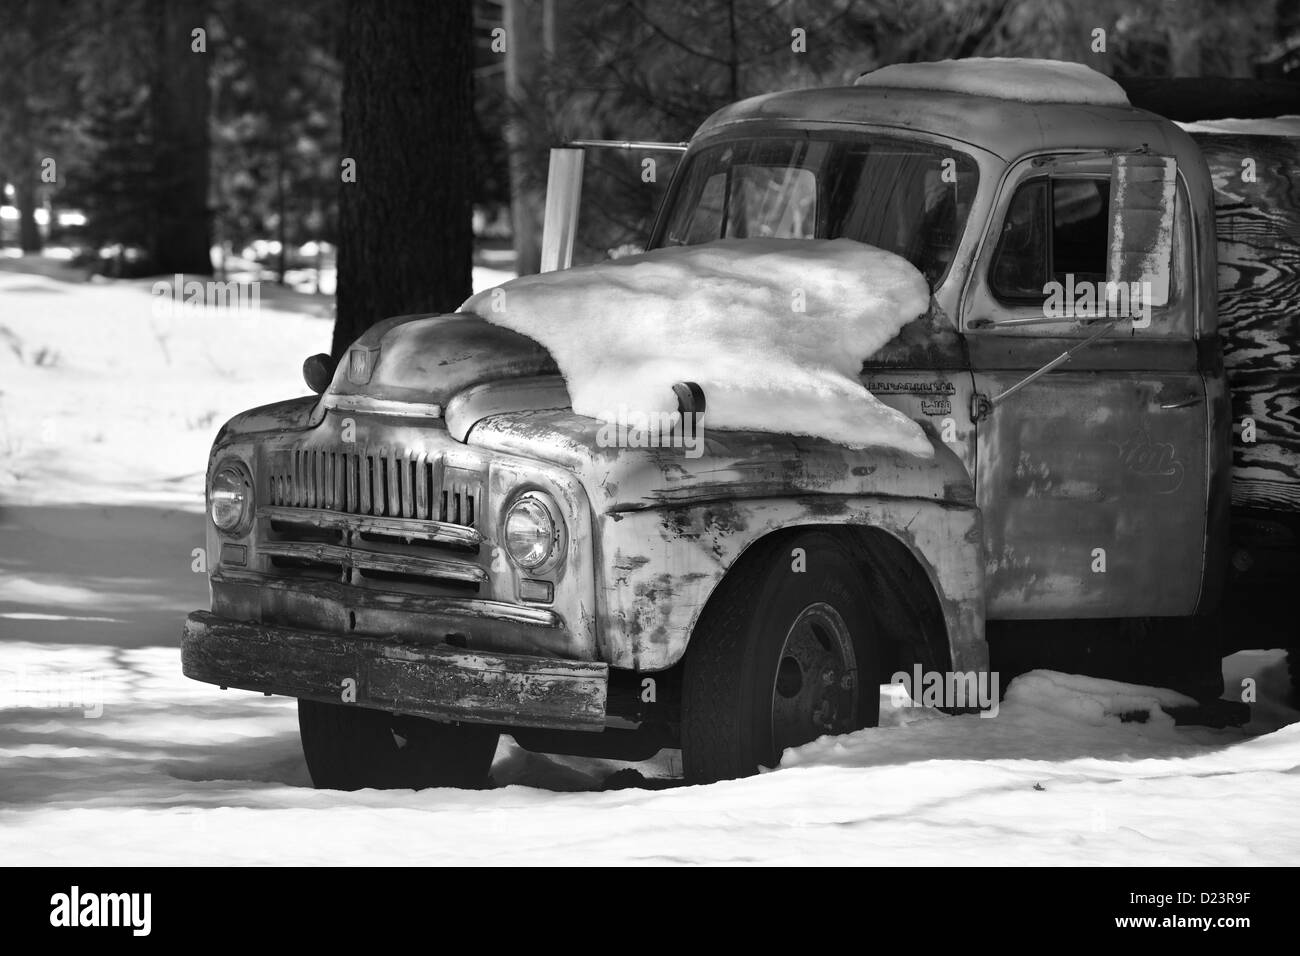 Black and white of old truck in snow Stock Photo